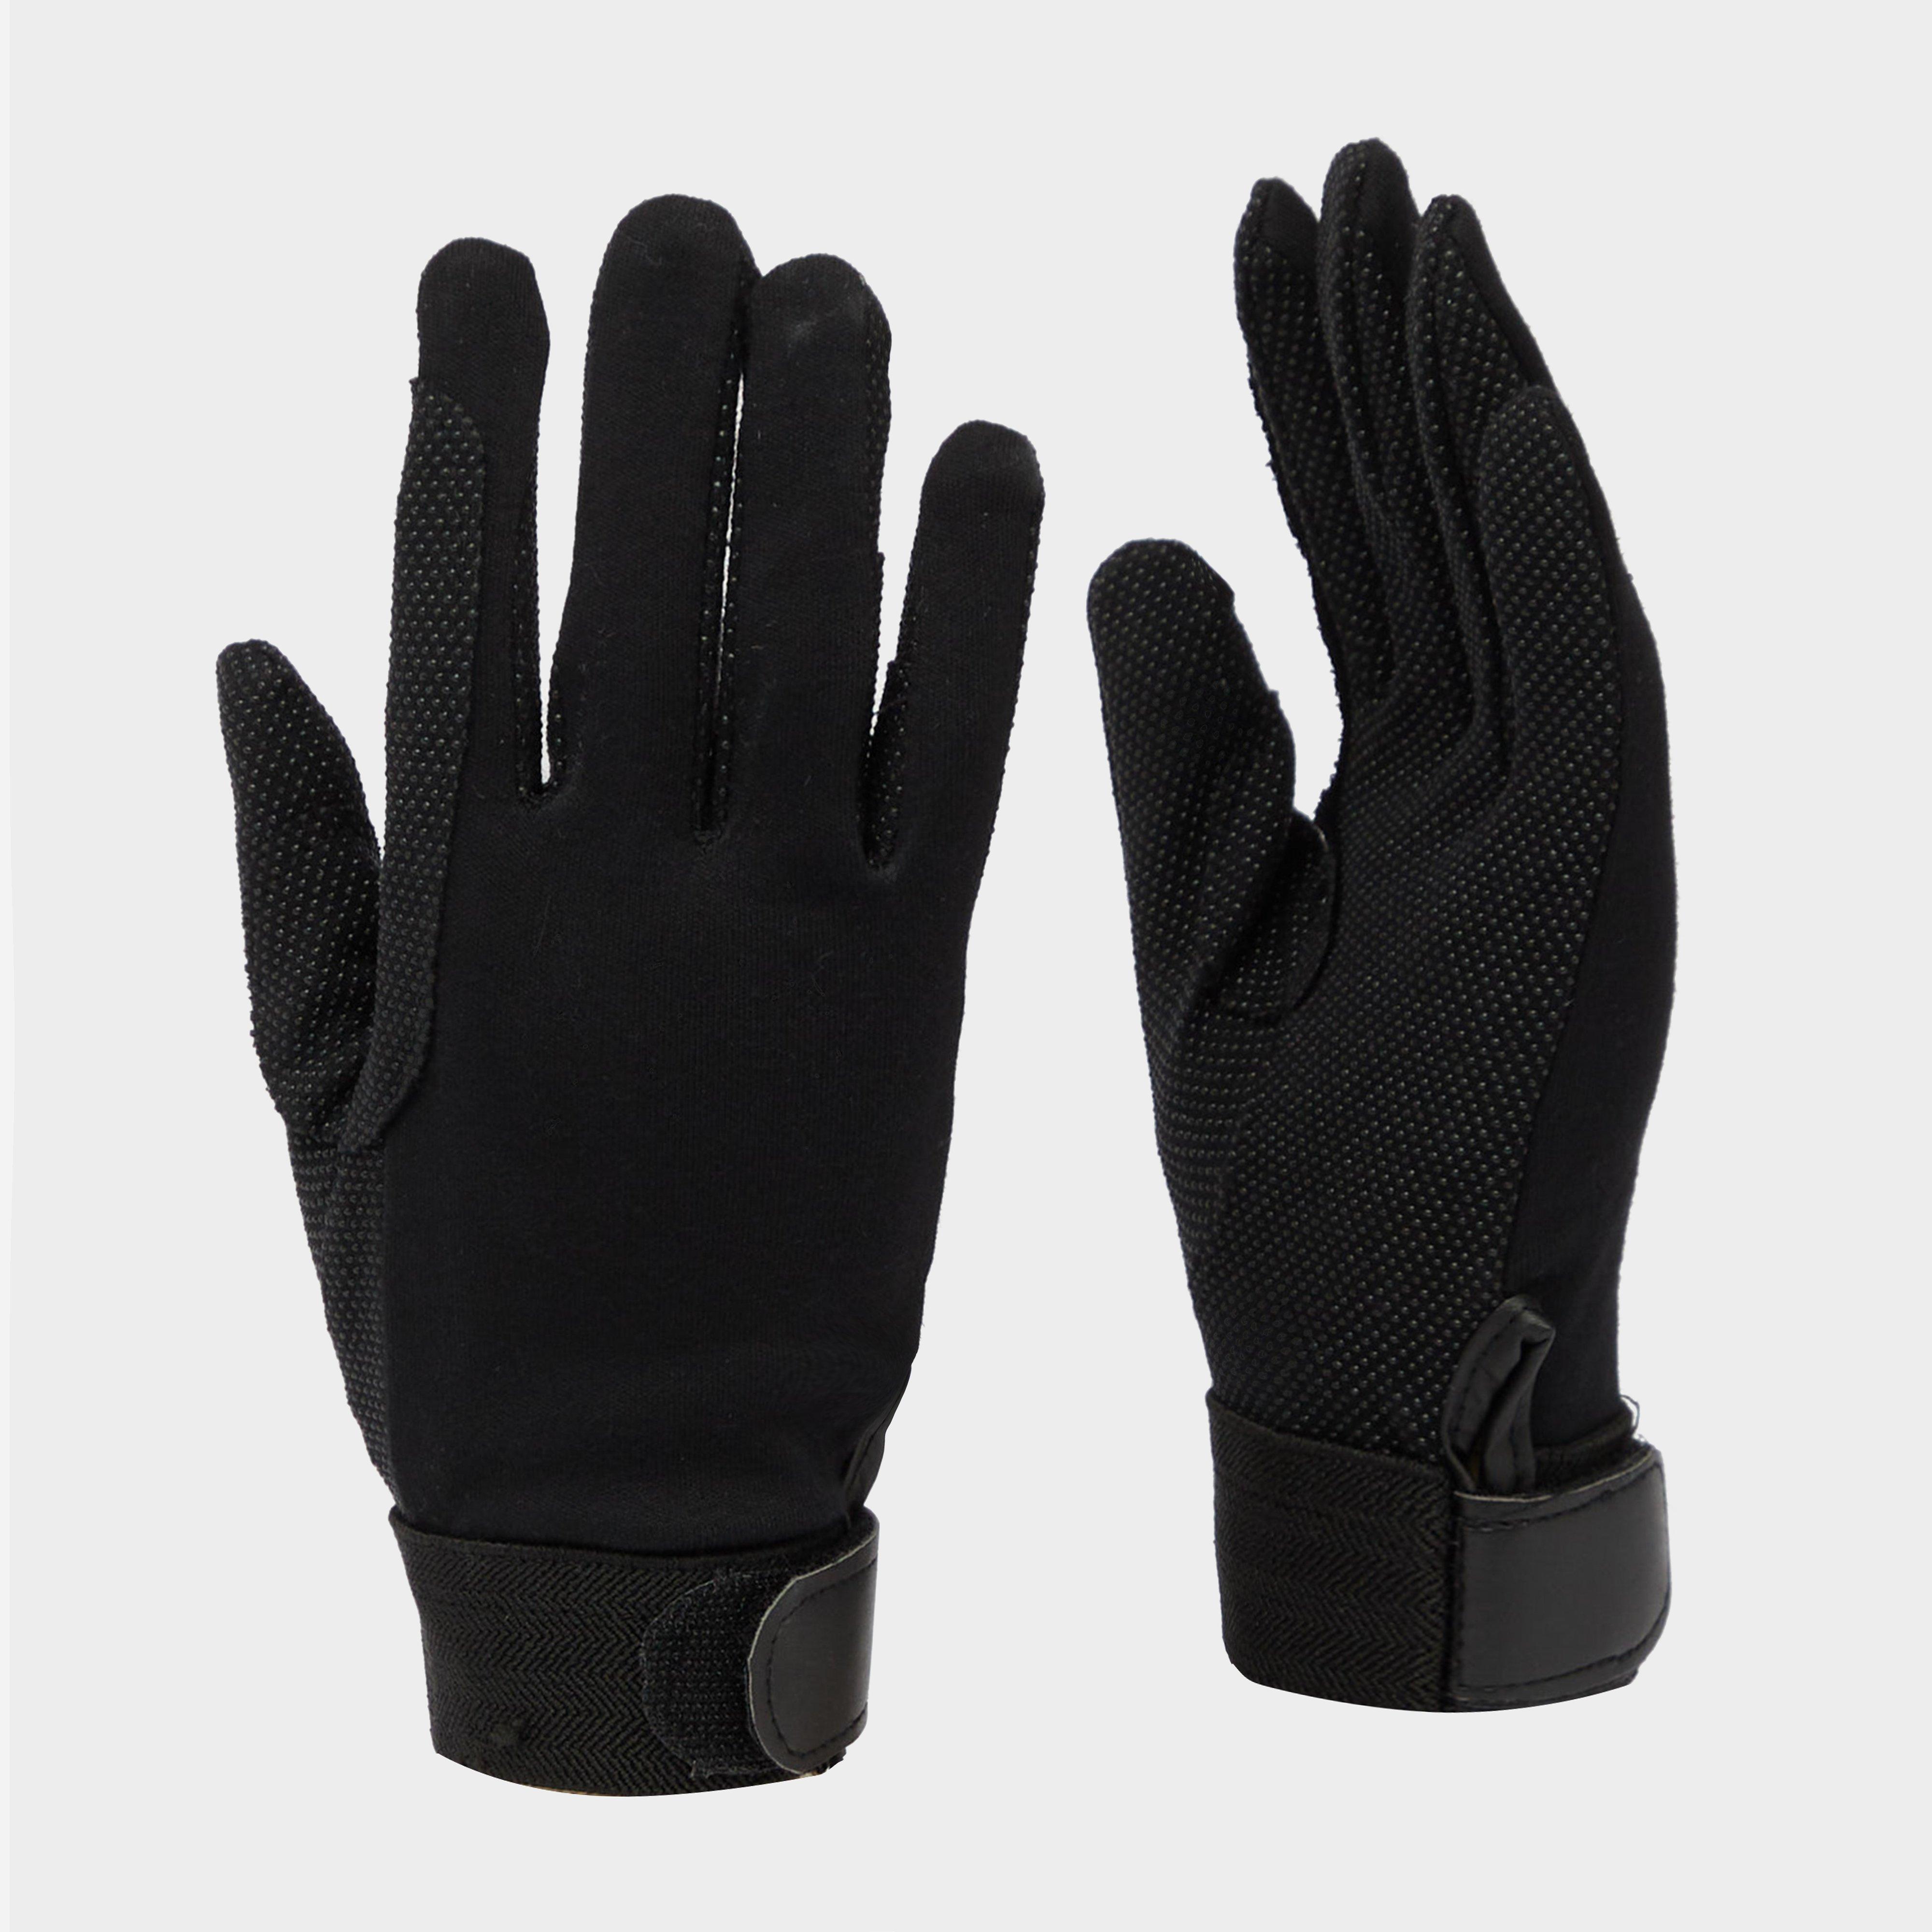 Heavy Weight Pimple Glove L Riding Gloves Sports & Outdoors